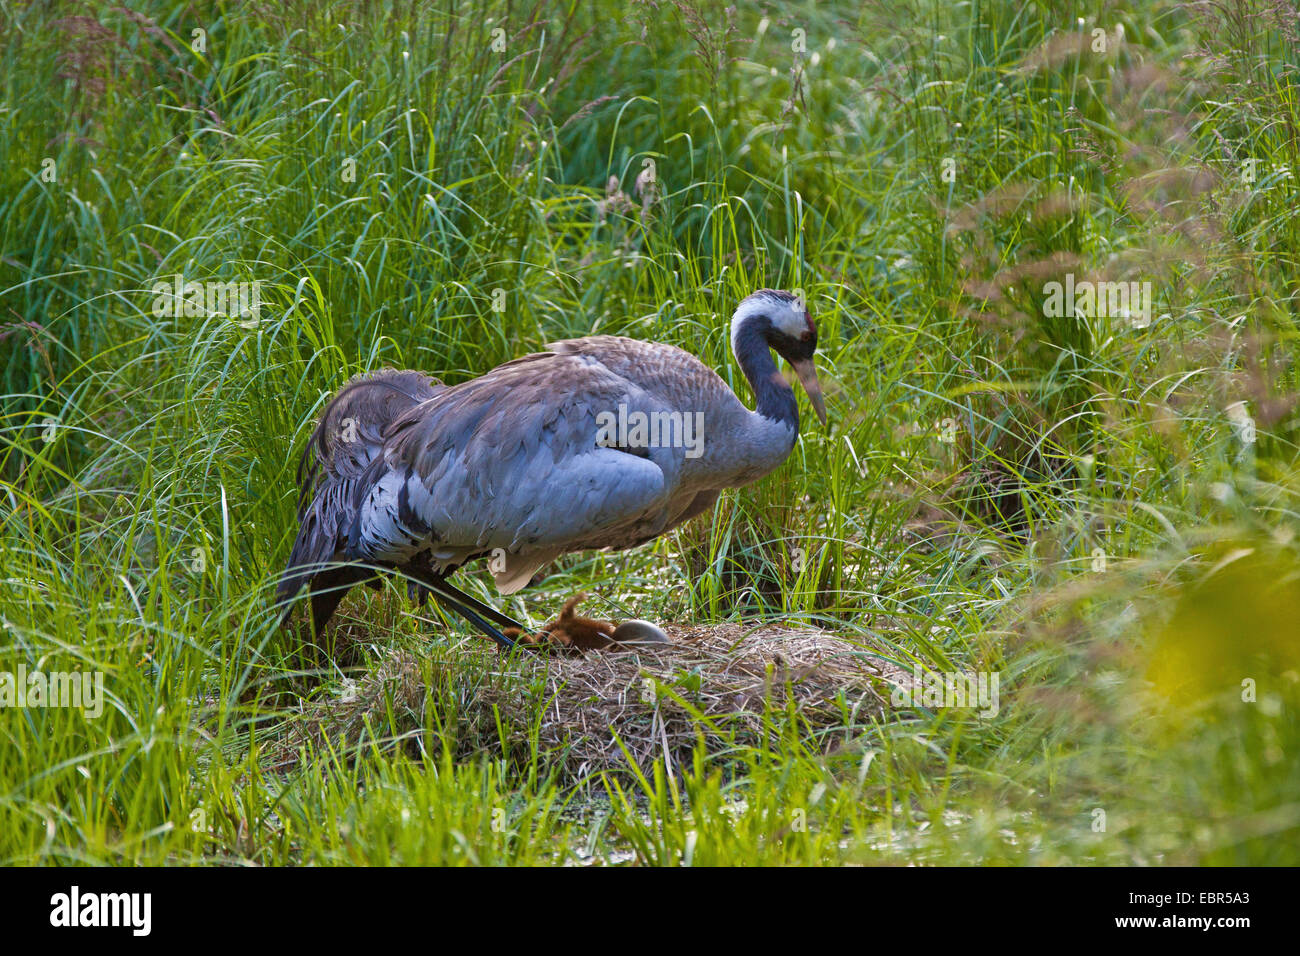 Common crane, Eurasian Crane (Grus grus), male at the nest with chick and egg, Germany, Mecklenburg-Western Pomerania Stock Photo